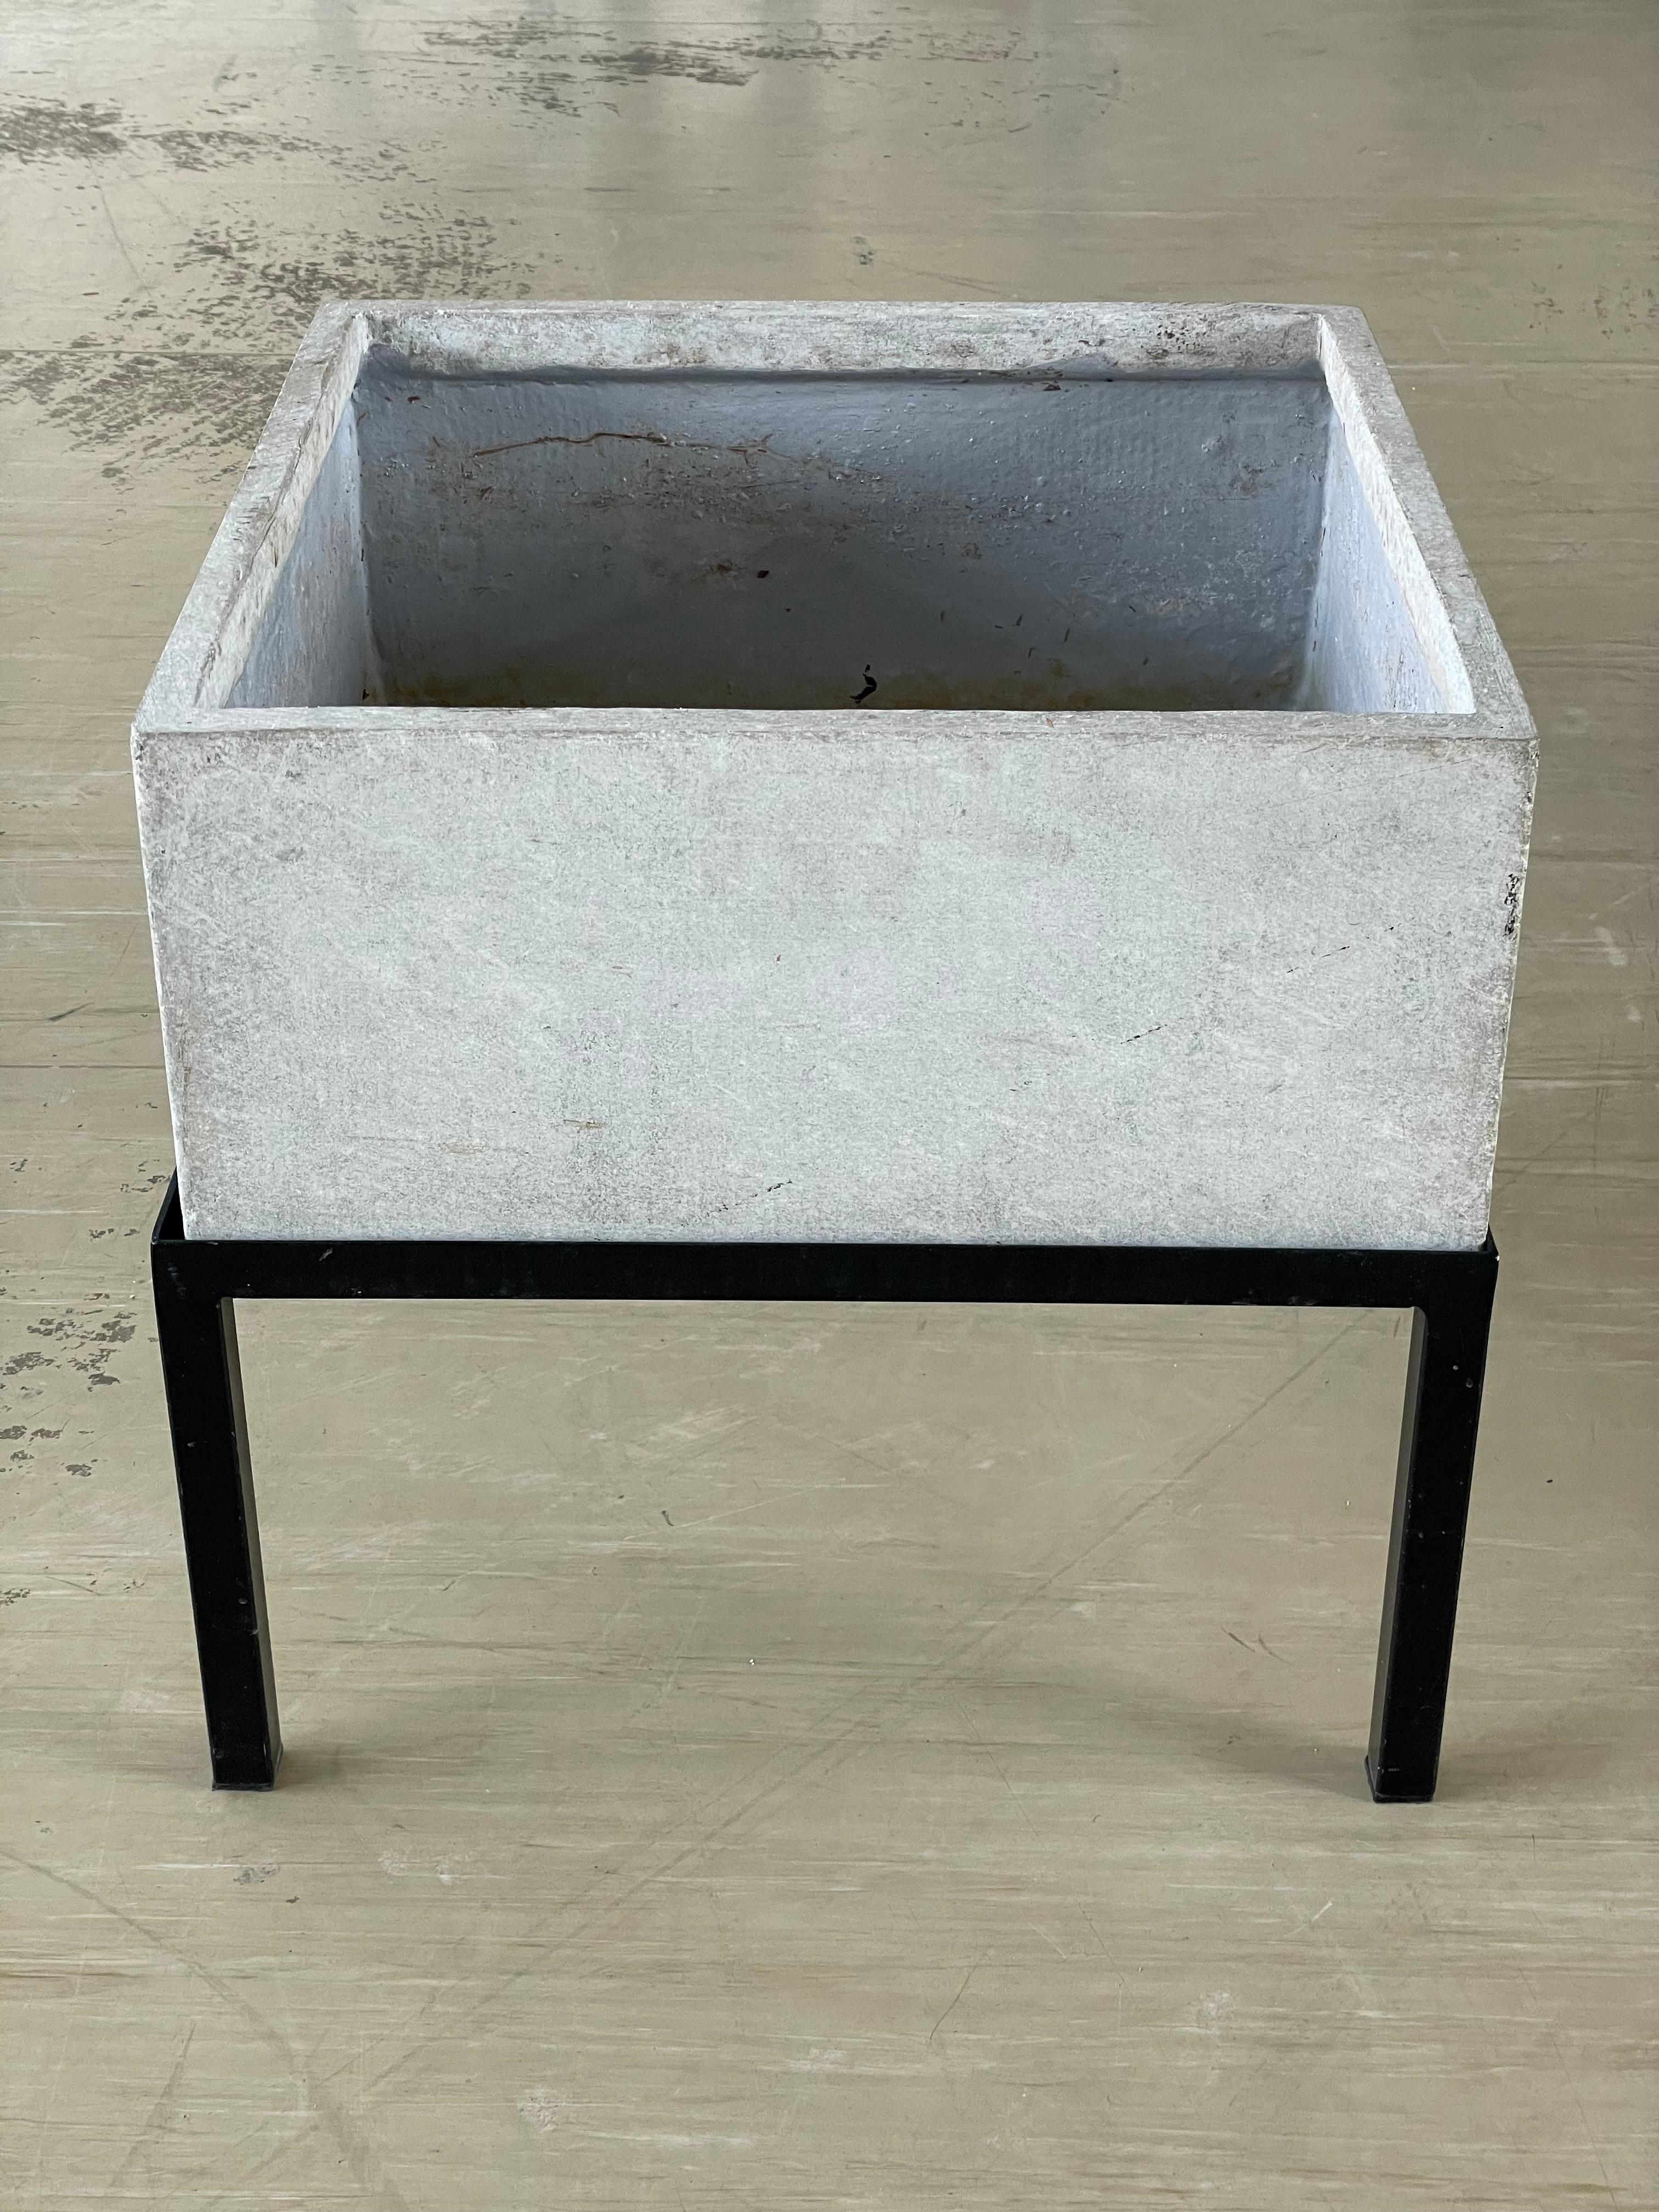 Rare Mid Century Swiss minimalist planter with original powder coated steel base. Designed by Willy Guhl and produced by Eternit AG, Switzerland, 1960’s. This item has never been used outdoors and remains in near perfect original condition. Sealed